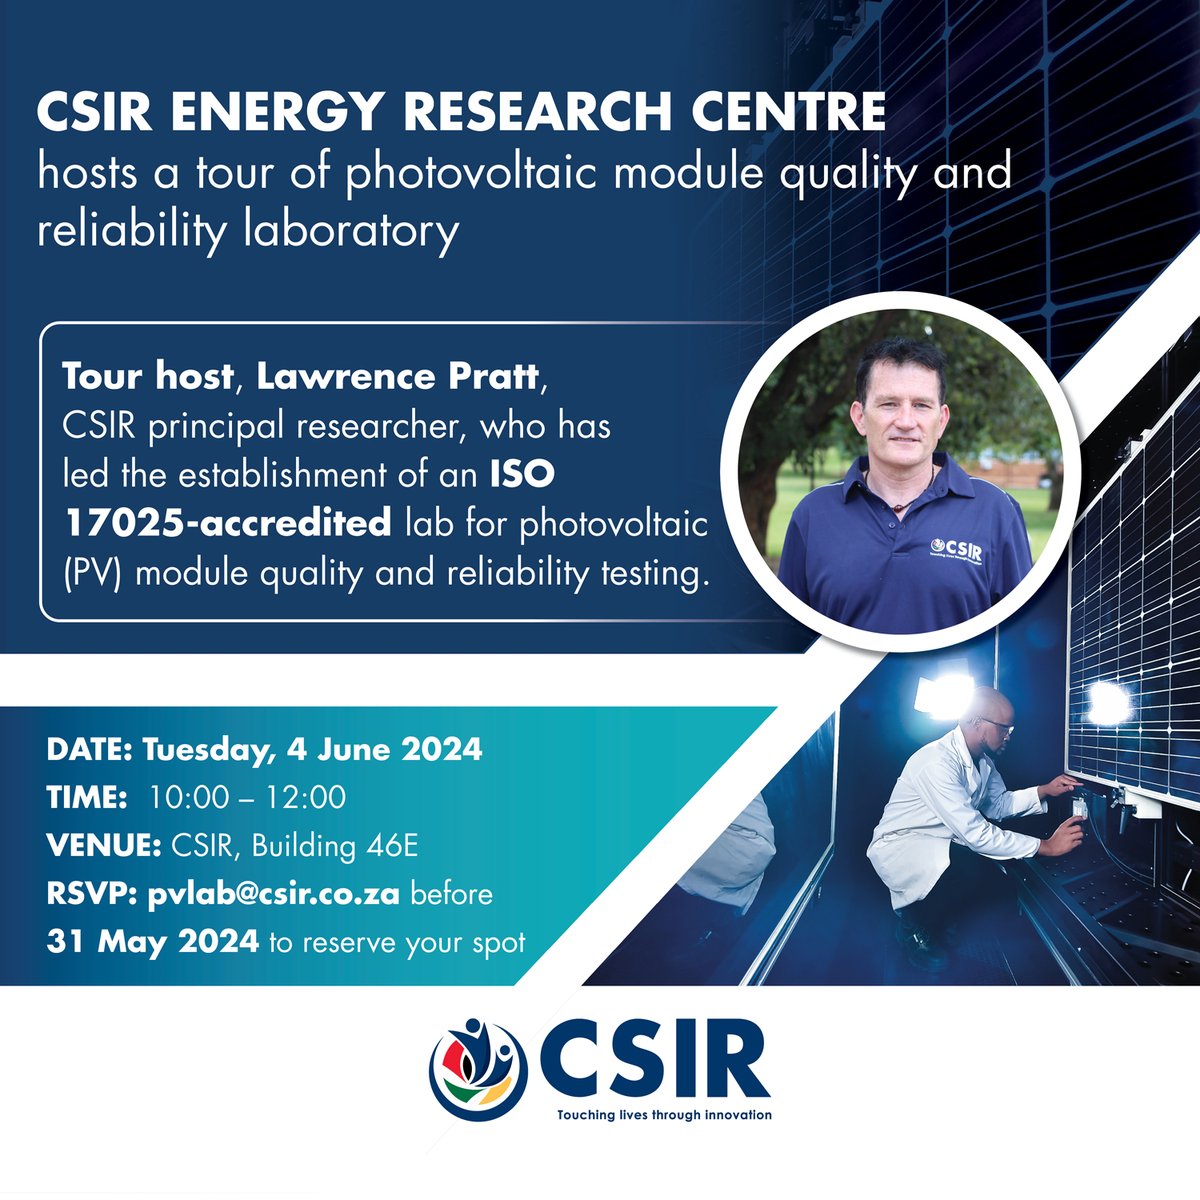 Join #TeamCSIR for a tour of the #PV module quality & reliability lab in PTA. The lab provides commercial testing services in compliance with international standards. 
4 June 2024
10:00 – 12:00
CSIR PTA
RSVP to pvlab@csir.co.za before 31 May to reserve your spot. Space is limited